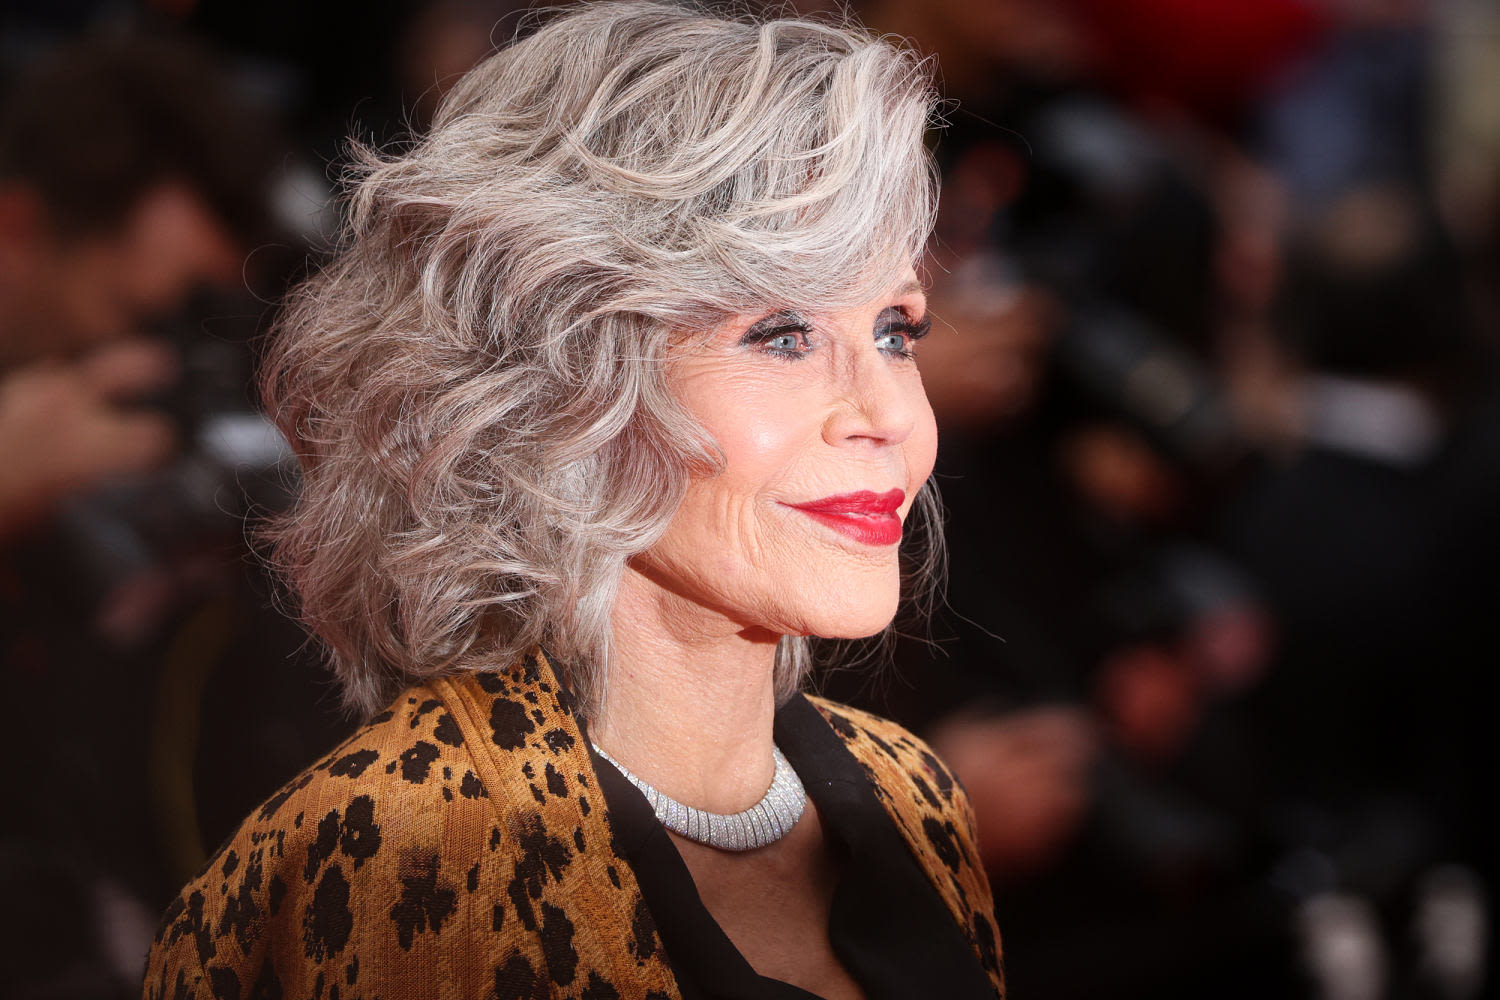 Why some conservative Vietnamese Americans are angry about L.A. County’s new ‘Jane Fonda Day’